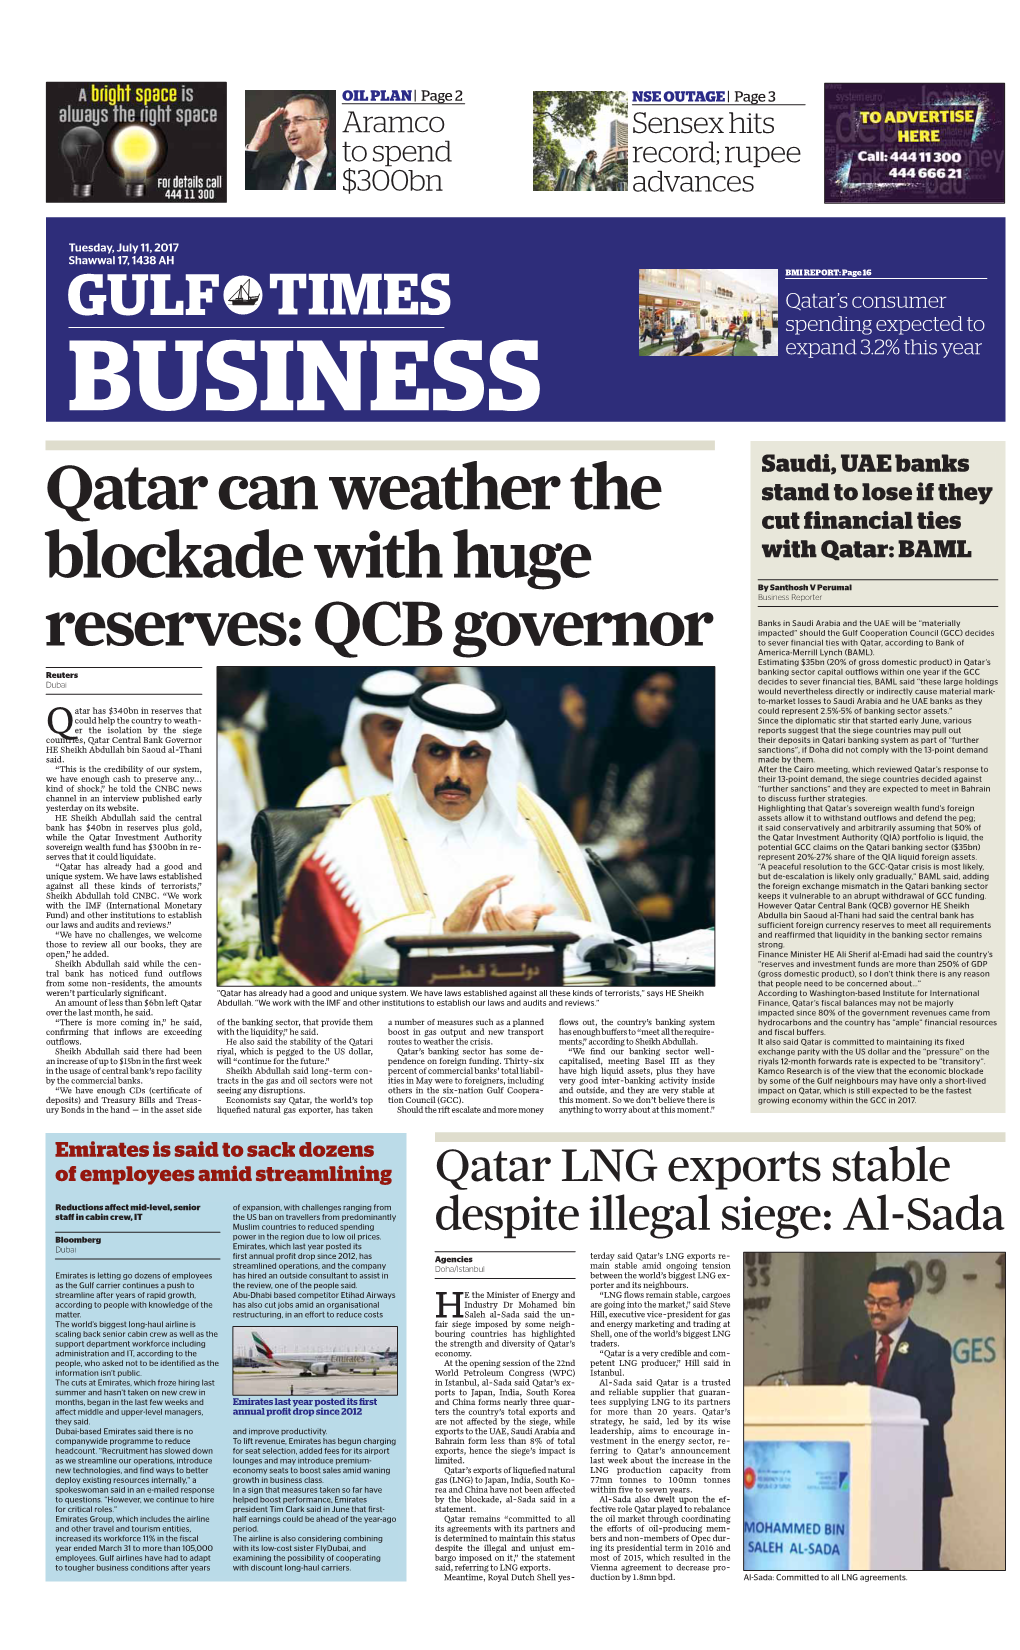 Qatar Can Weather the Blockade with Huge Reserves: QCB Governor